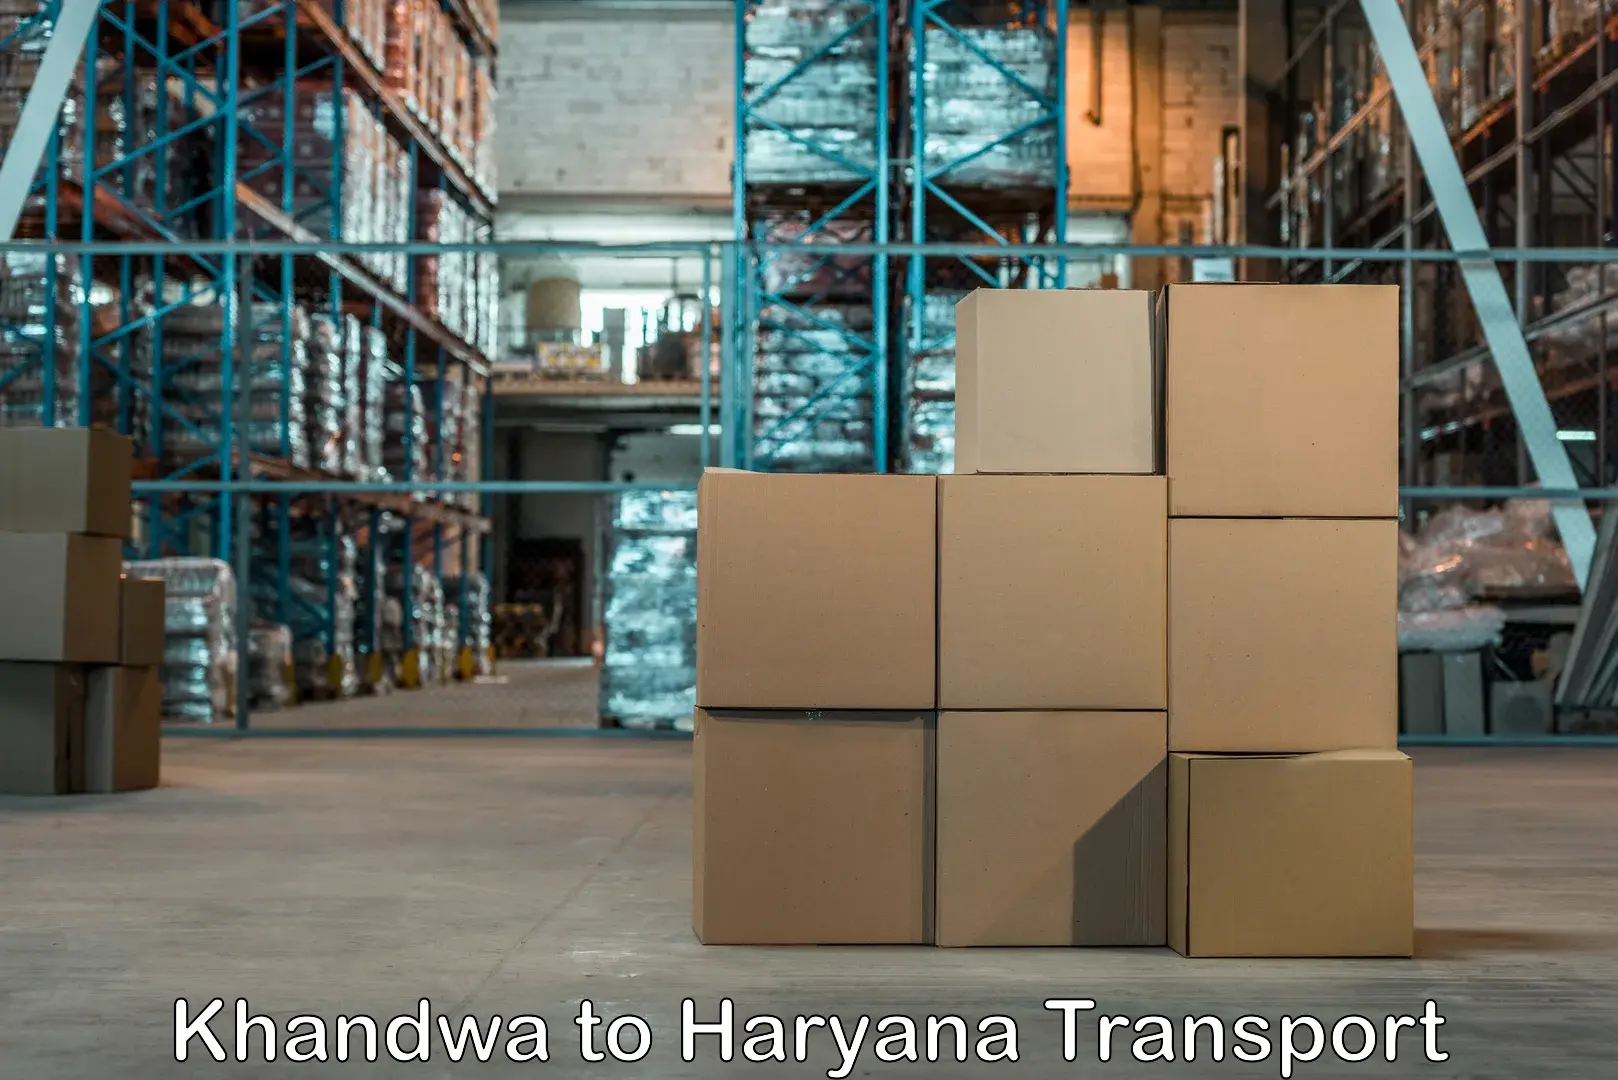 Express transport services in Khandwa to Haryana